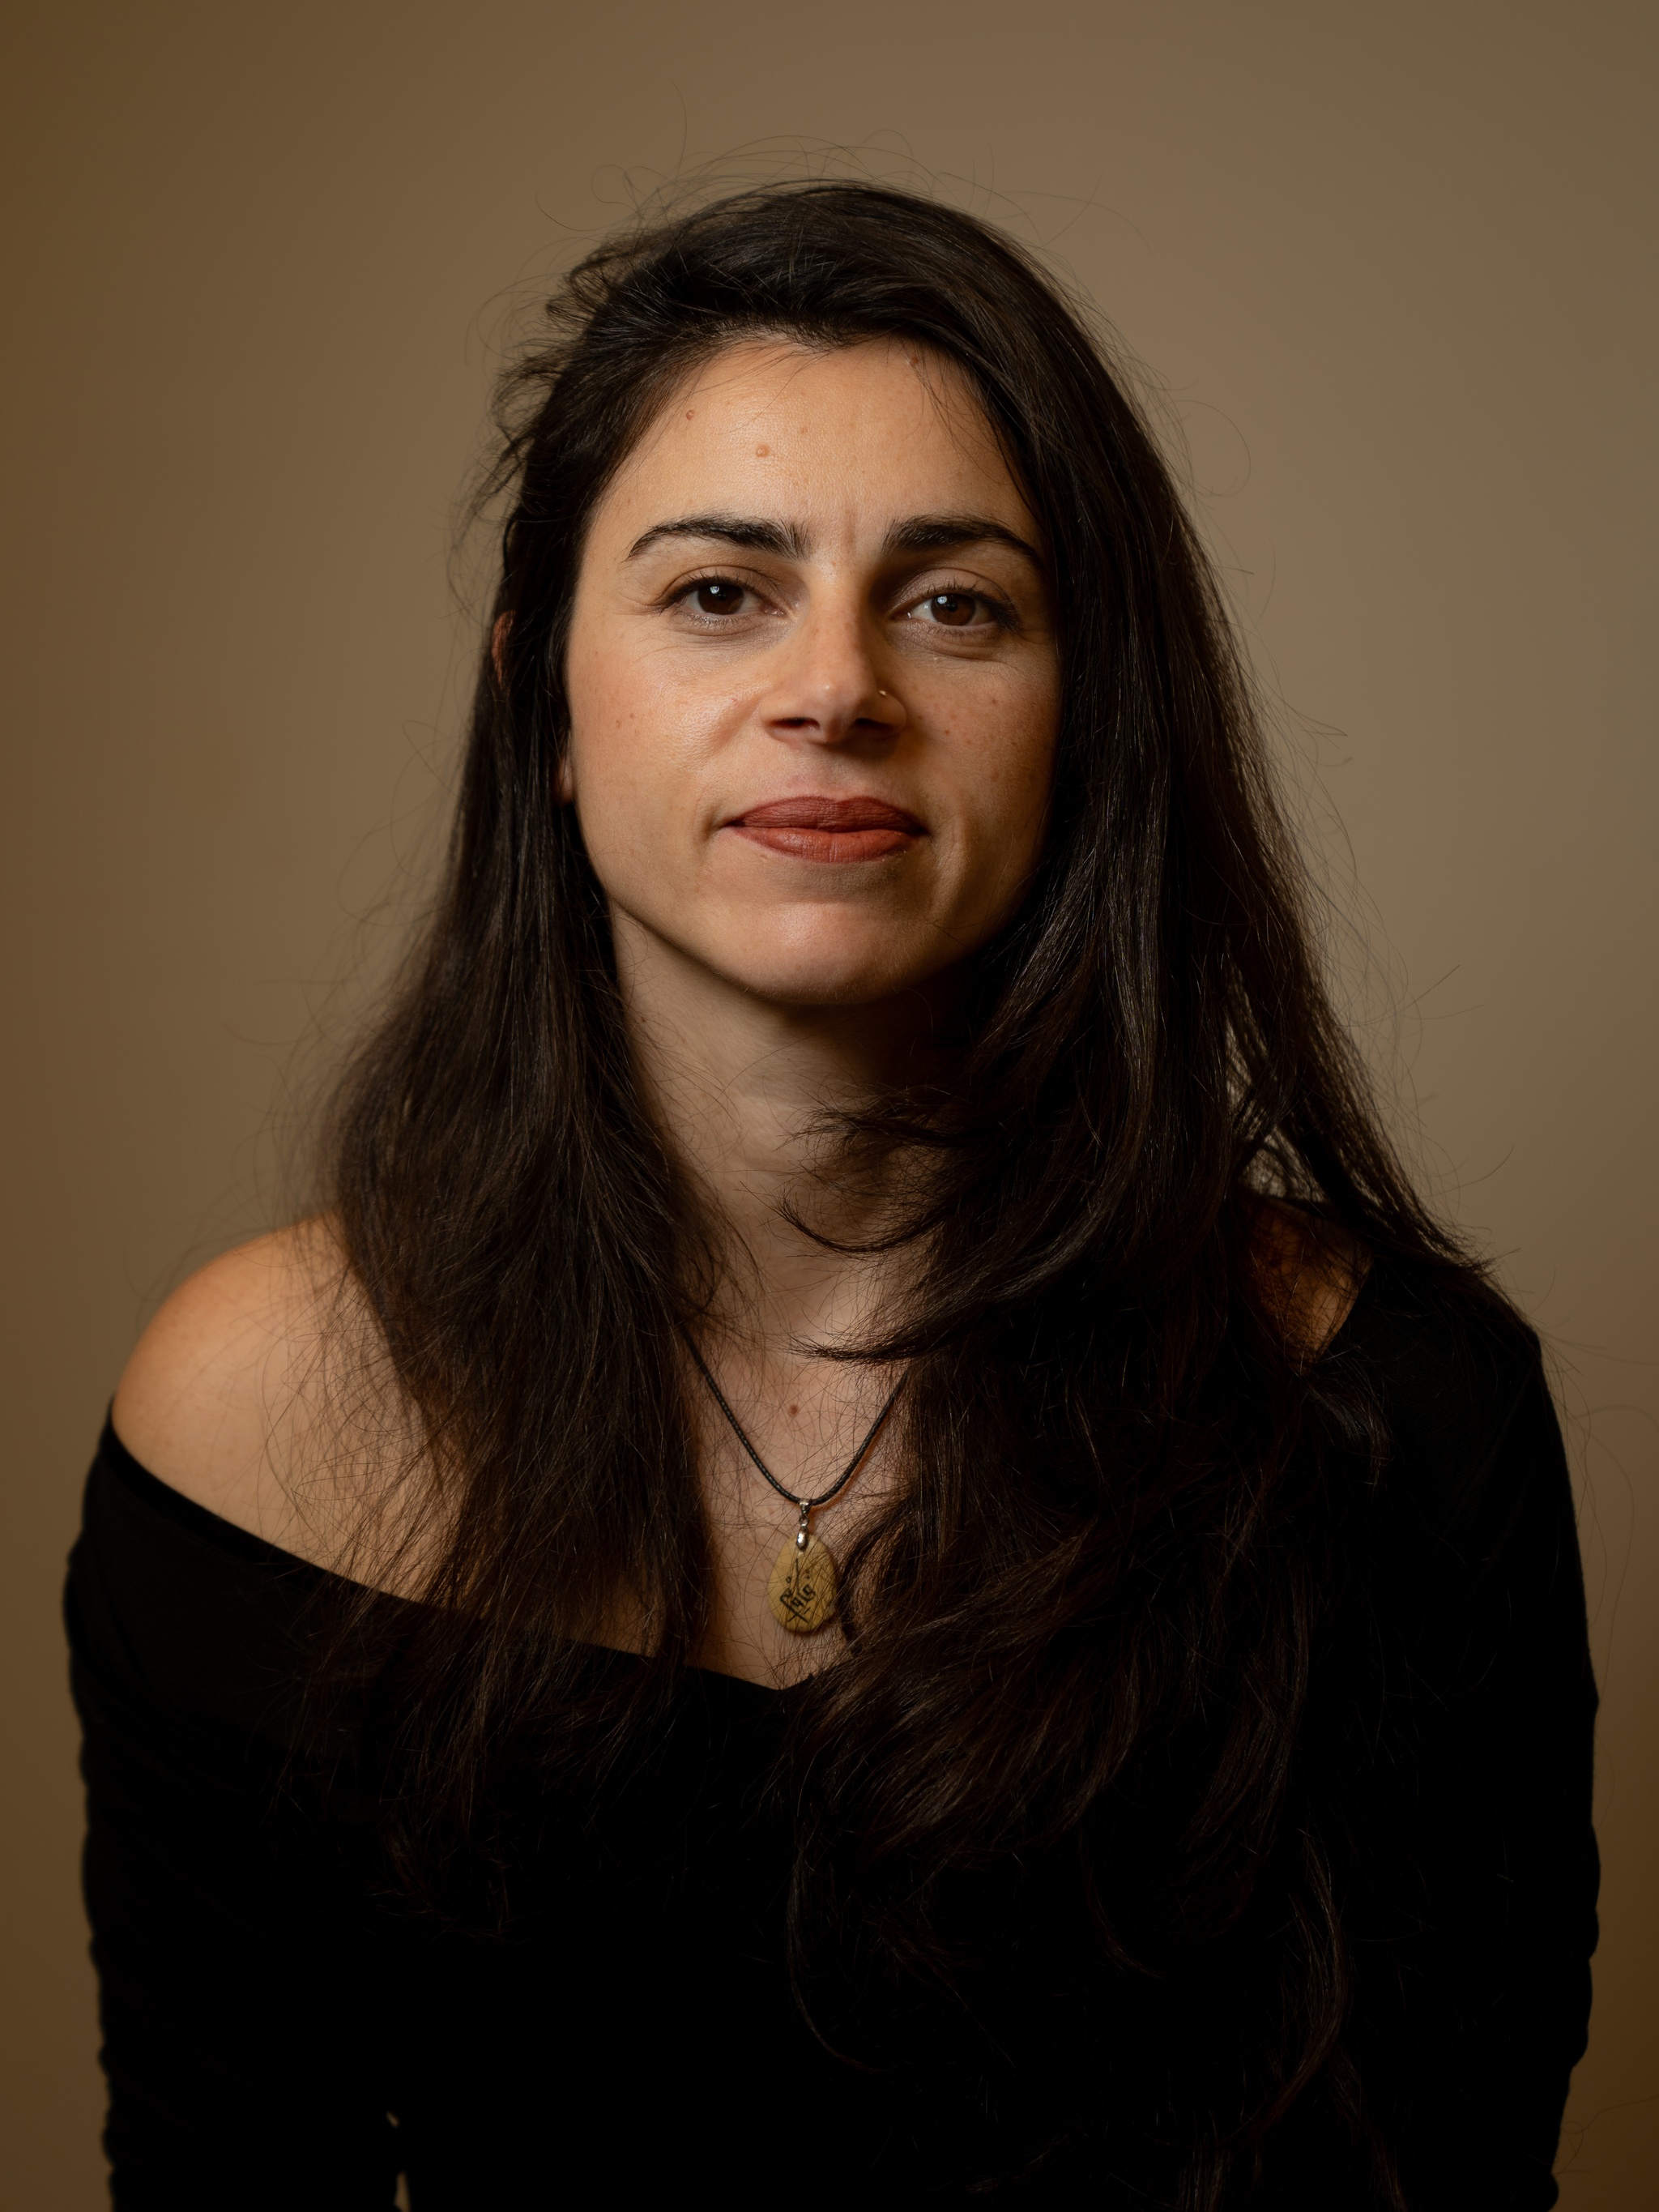 A portrait of Samaa Wakim against a neutral dark brown background. Samaa has long dark brown hair that falls below her shoulders. She wears a shoulderless top and looks directly at us, smiling slightly. 